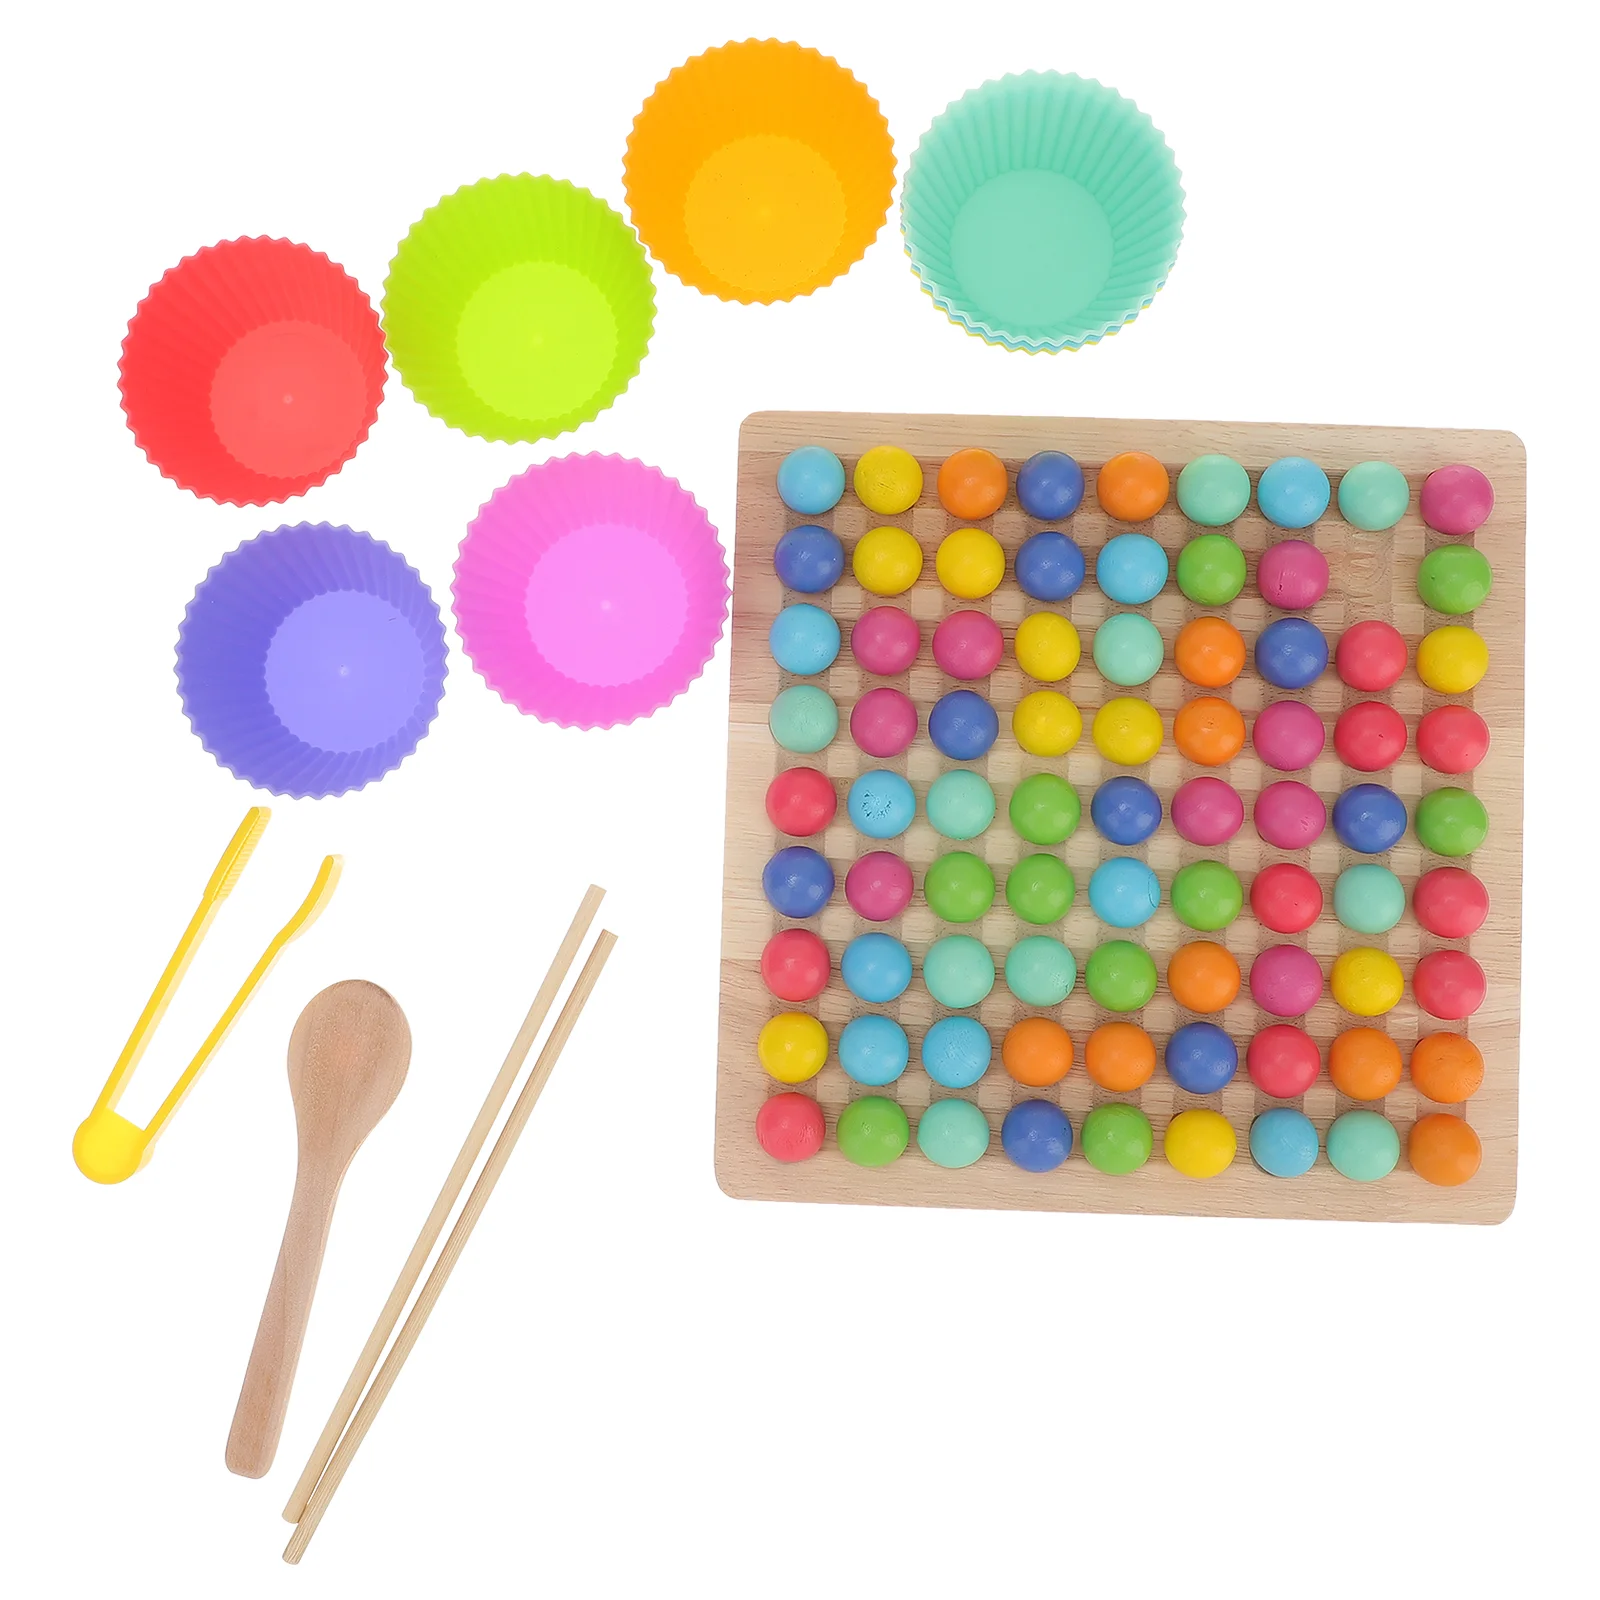 Kids Sports Toys Wooden Go Games Set Educational Sorting Montessori Toddler Car Elimination Beads Color Recognition Match